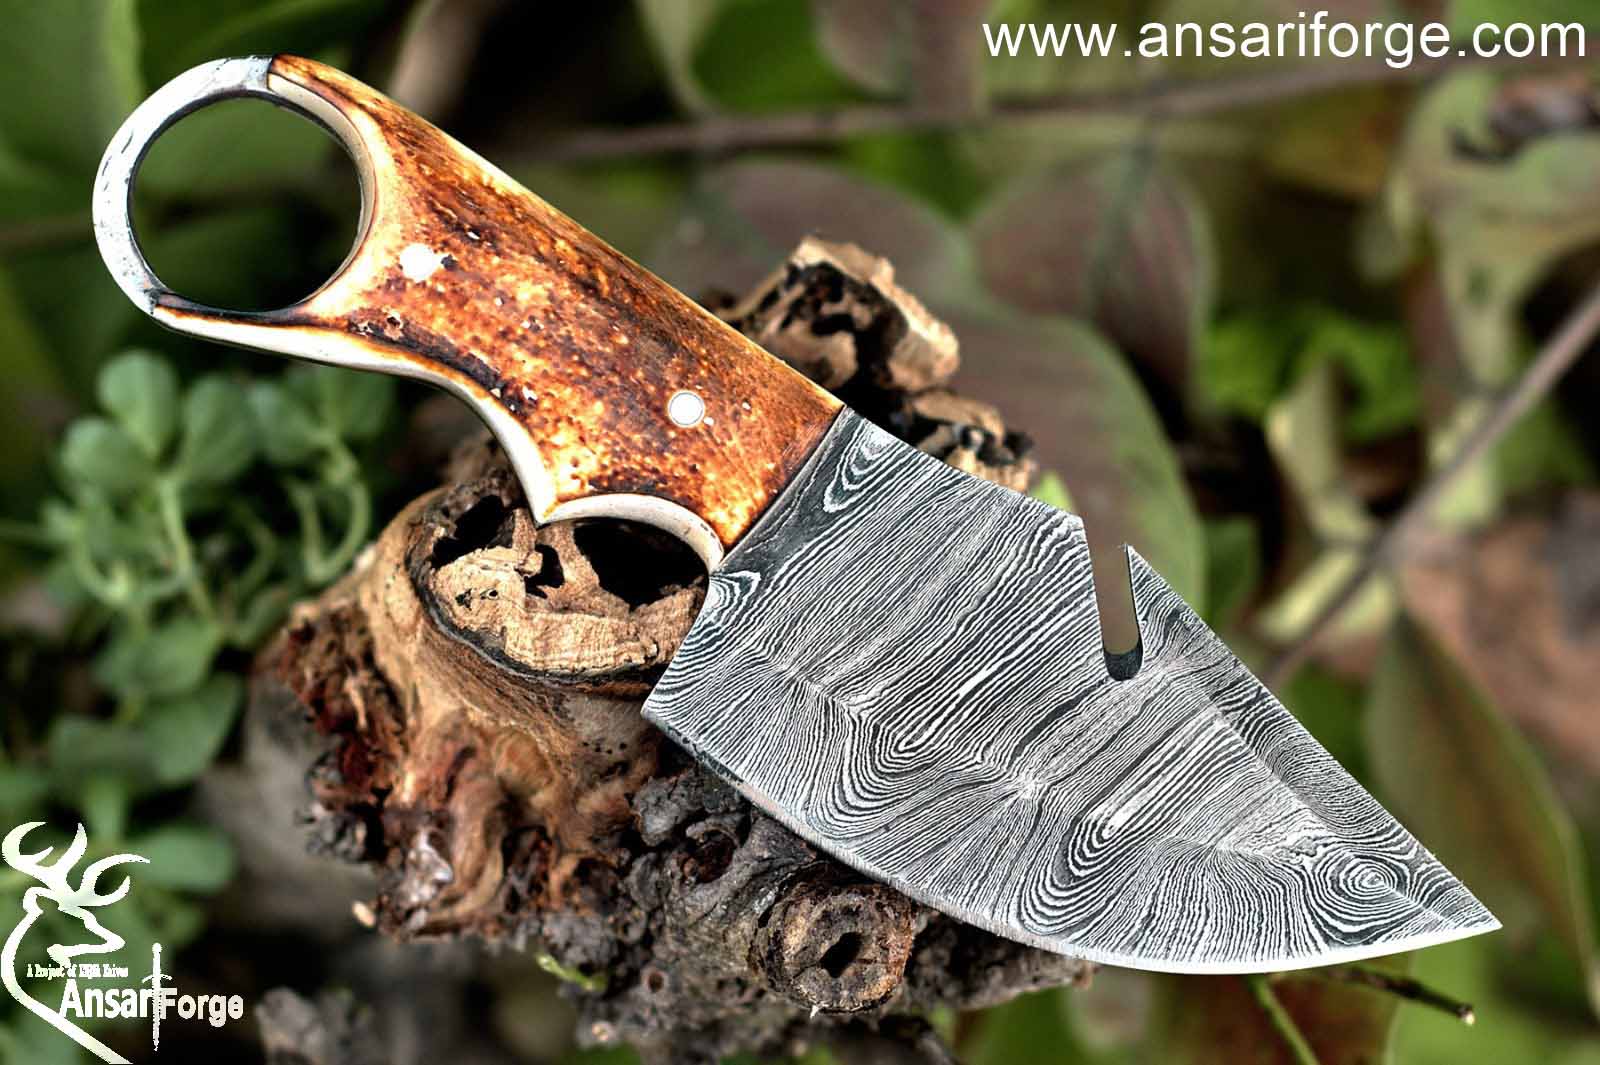 7.5 Hand Forged Damascus Steel Gut Hook Skinning Knife, Natural